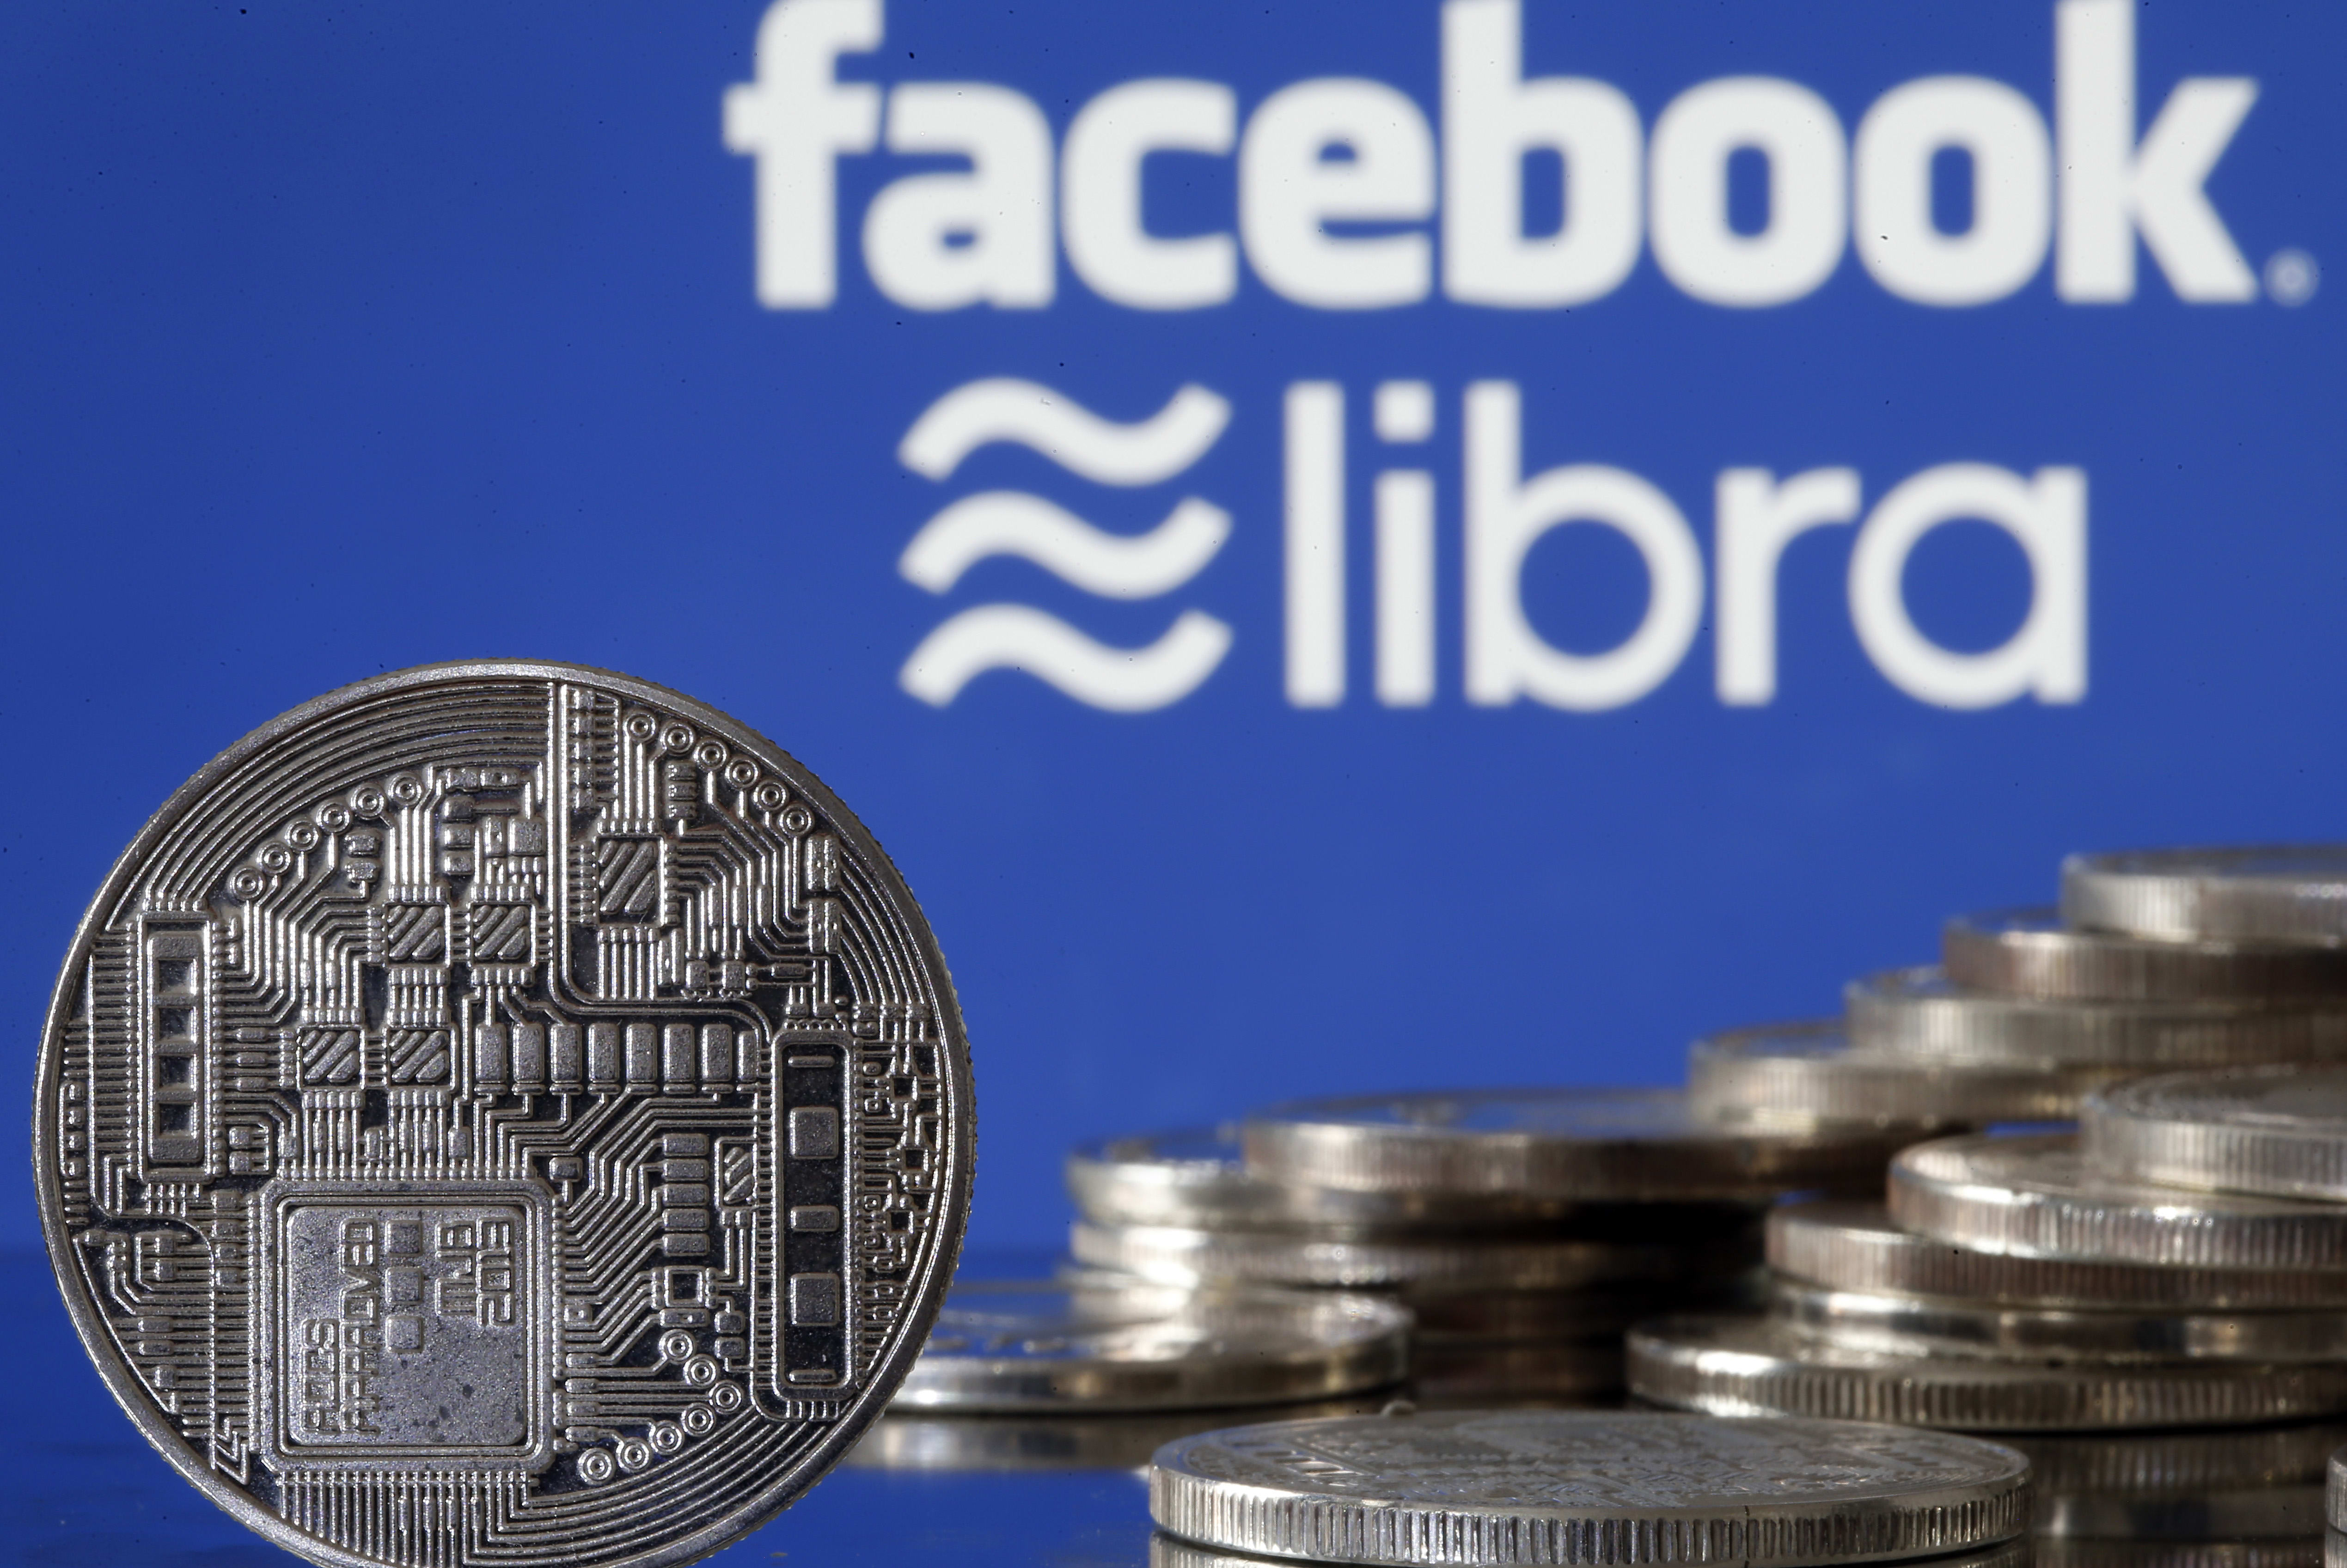 Here's why regulators are so worried about Facebook's digital currency